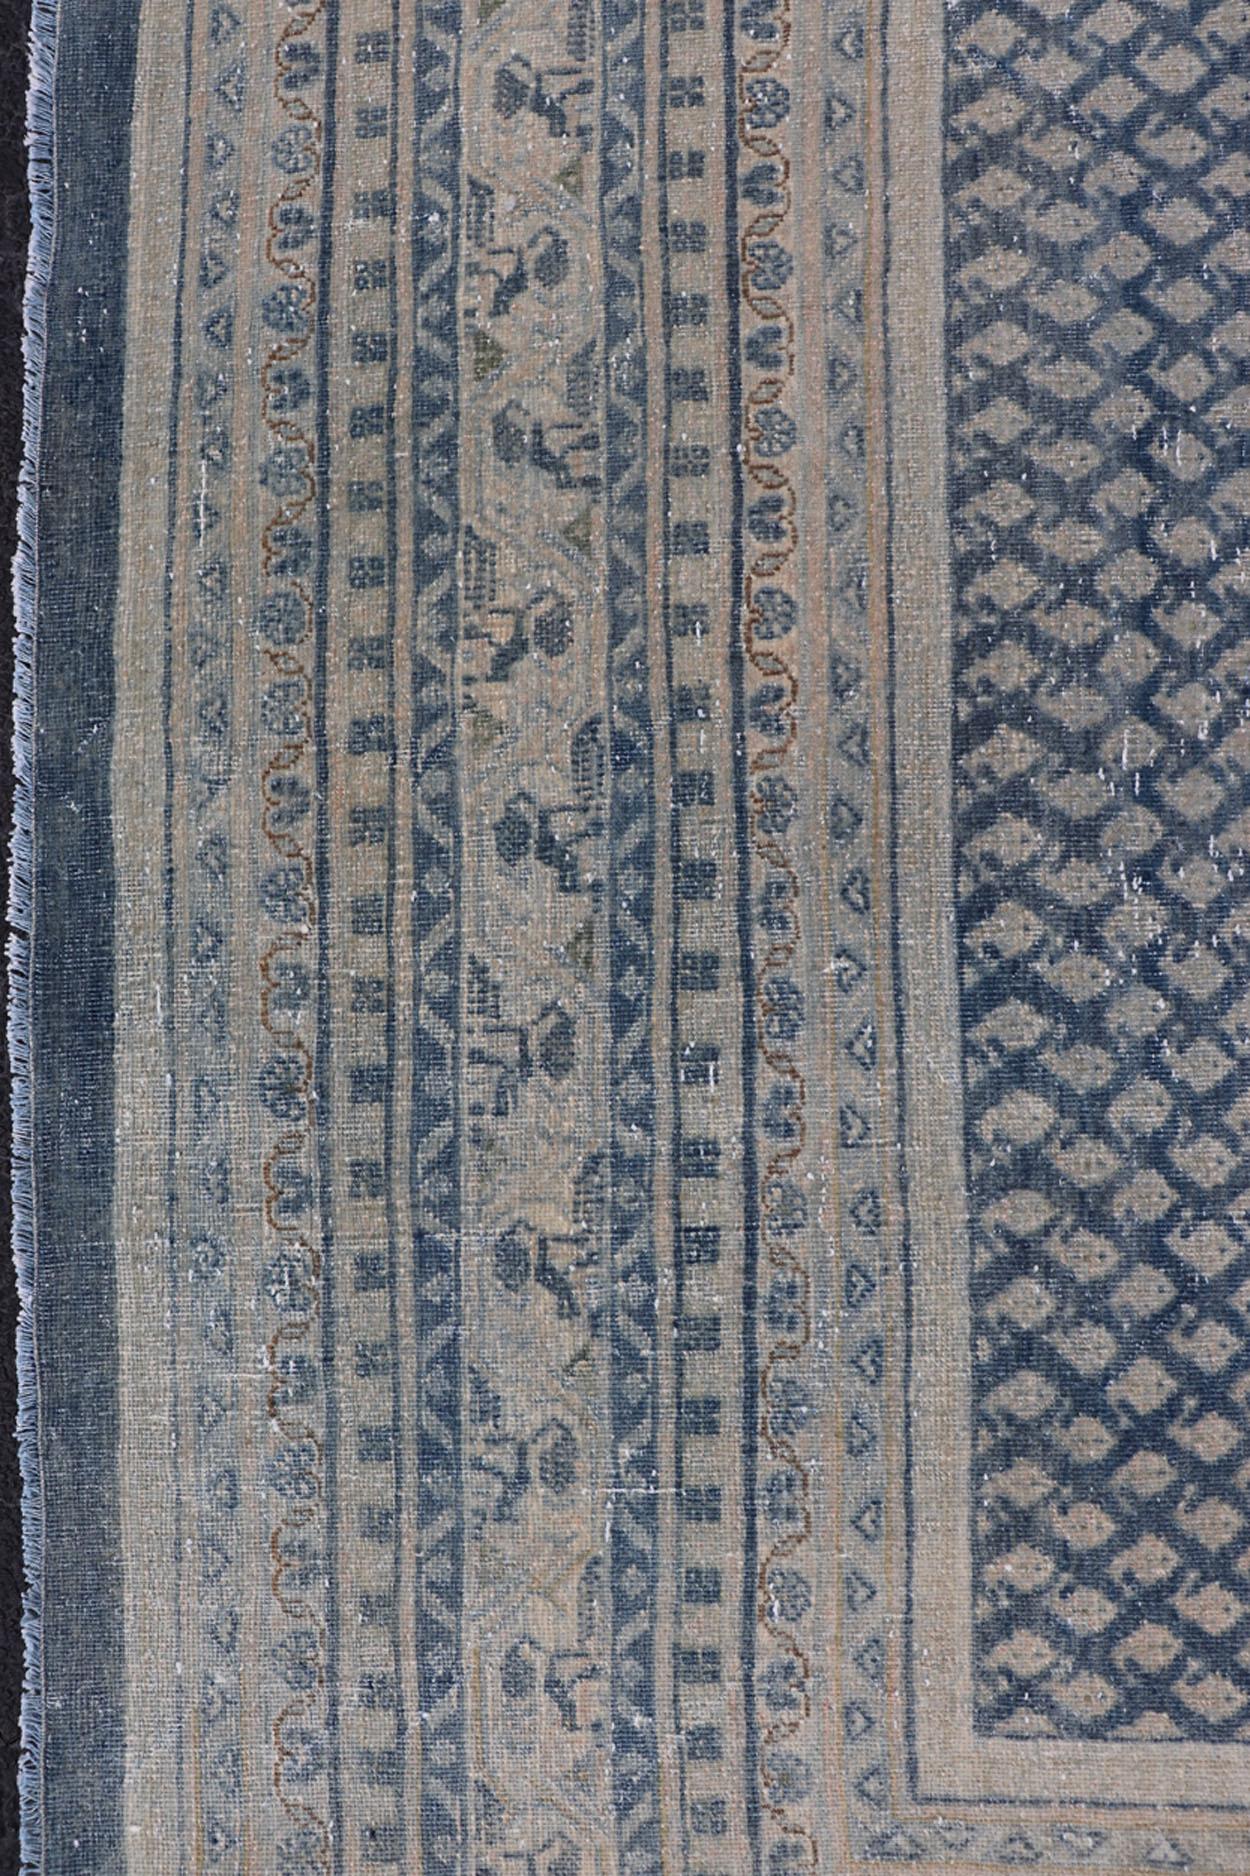 20th Century Minimalist Design Antique Persian Tabriz Rug with Modern Look in Blue Tones For Sale